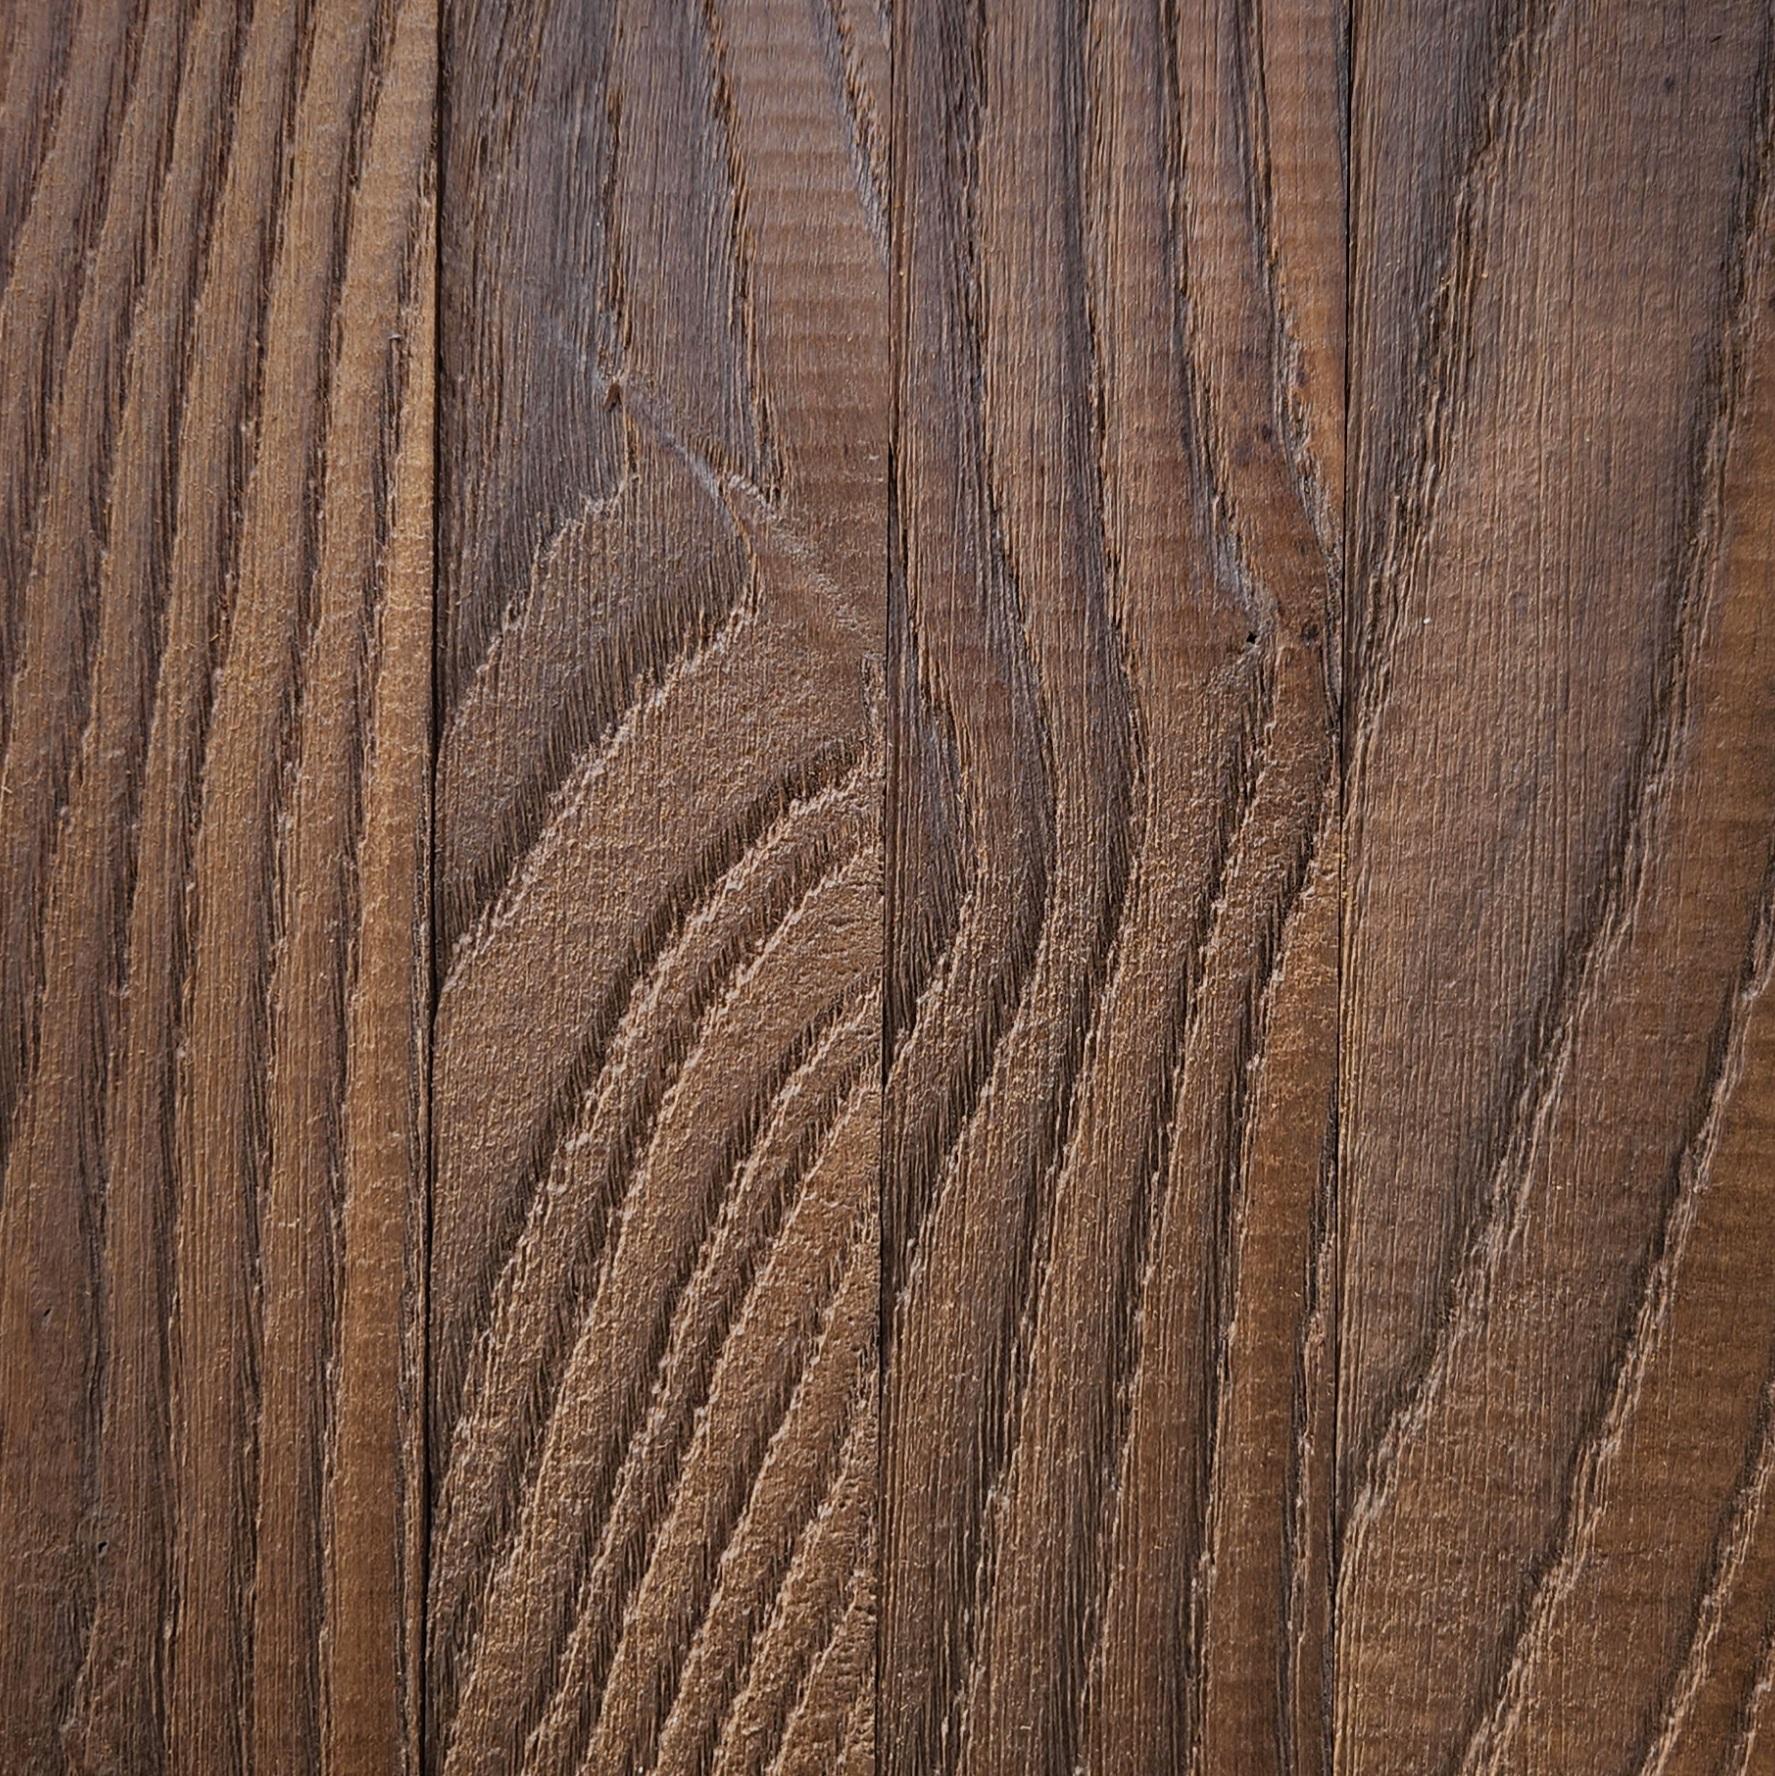 Distressed timber